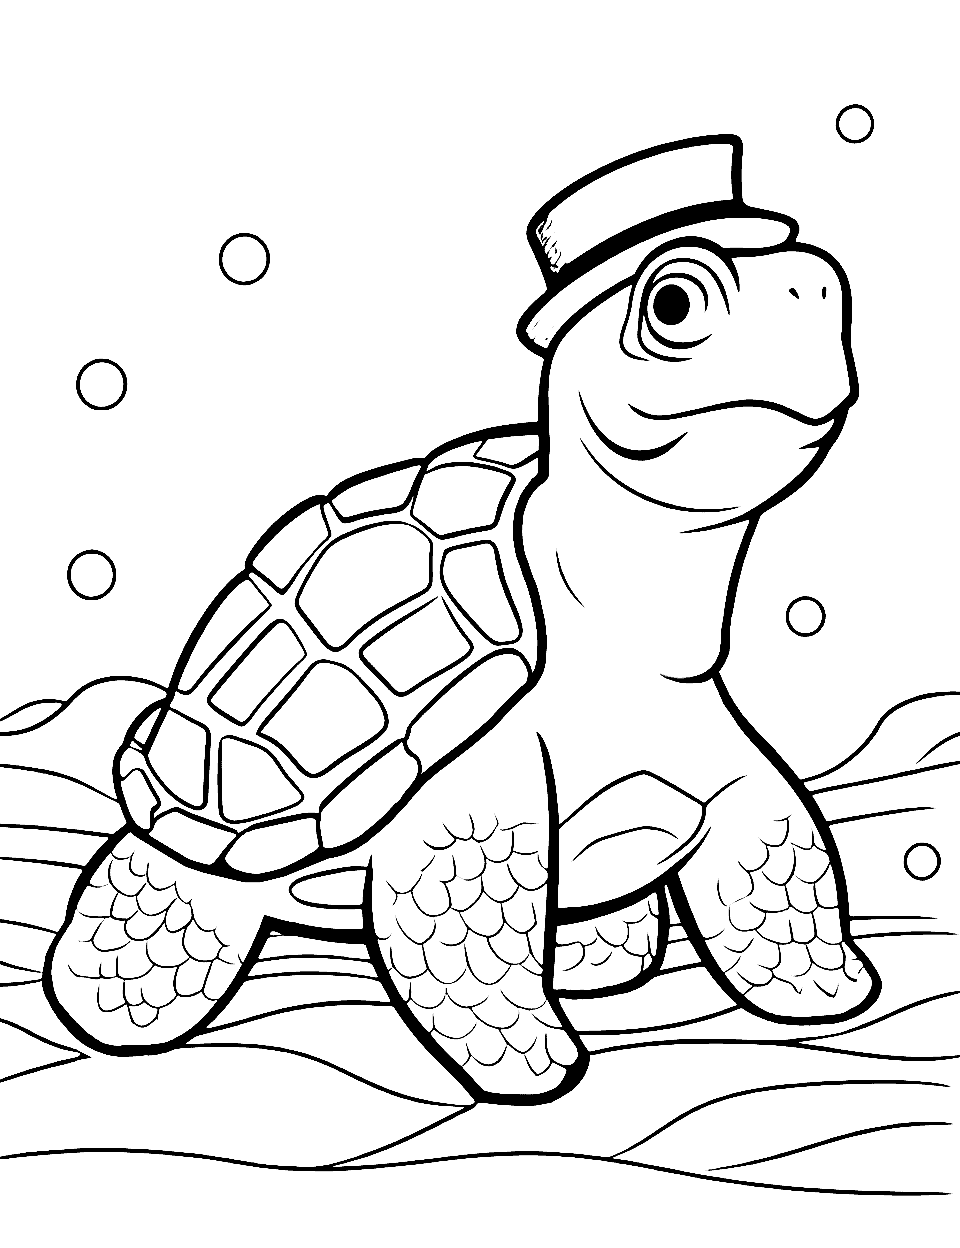 Fashionable Turtle Coloring Page - A turtle wearing a stylish hat, ready to make a statement.